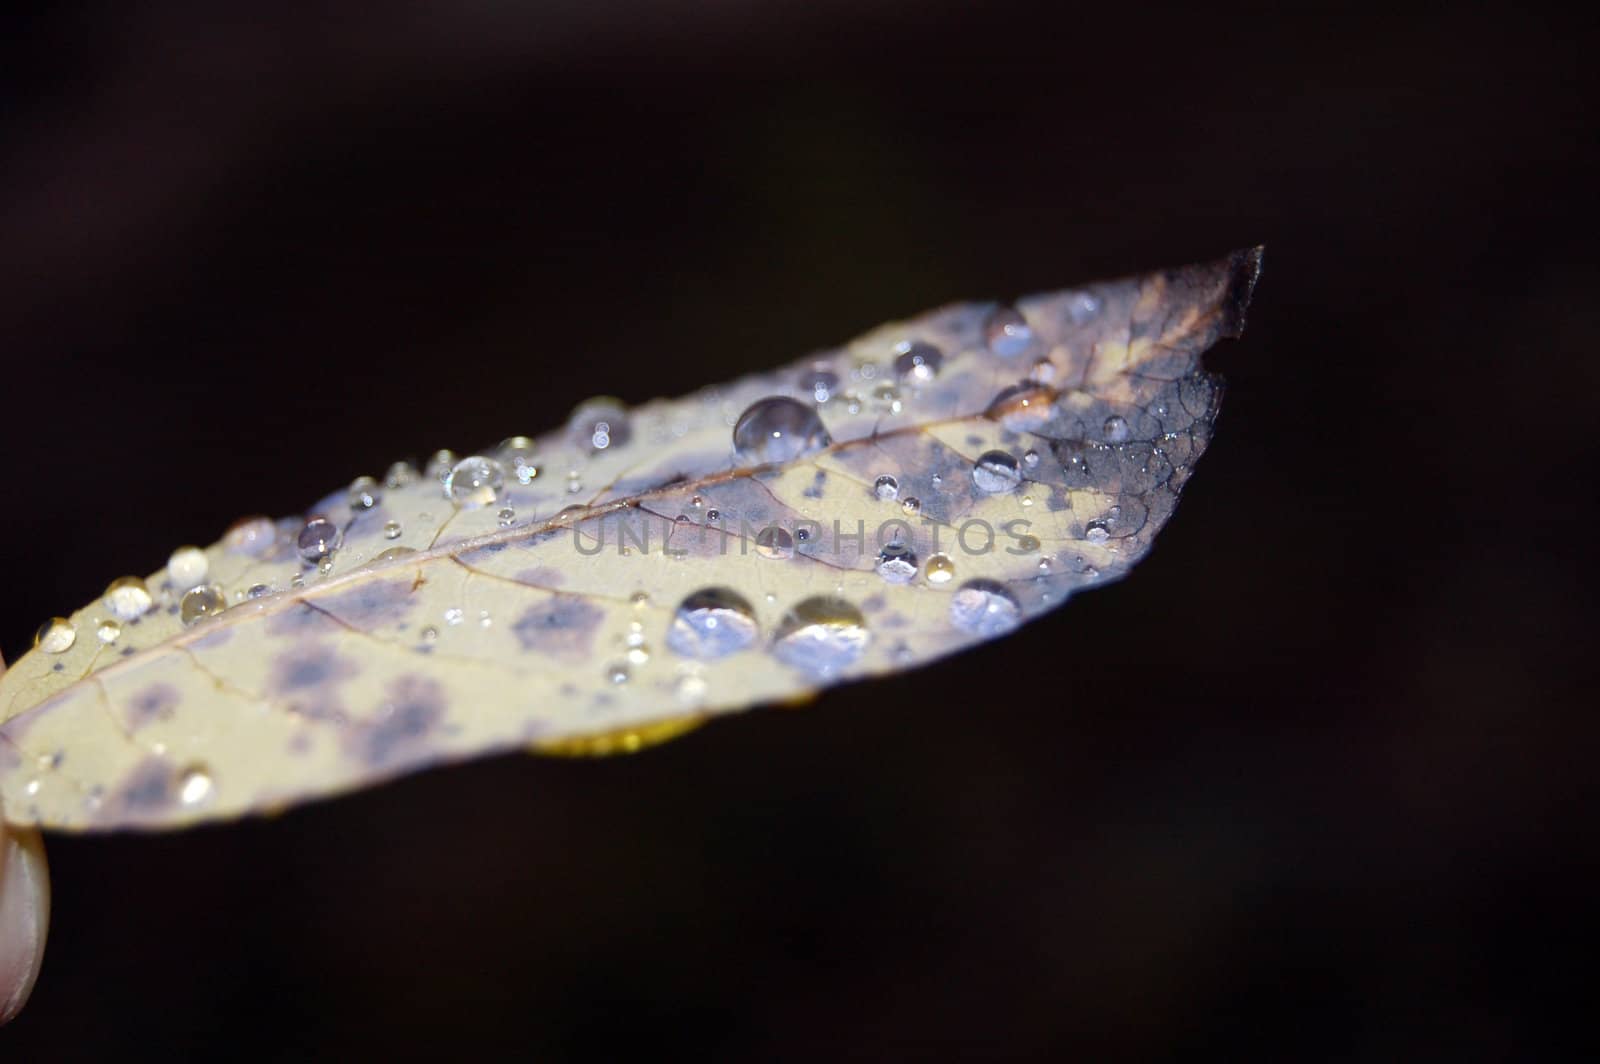 Leaf with raindrops by mojly